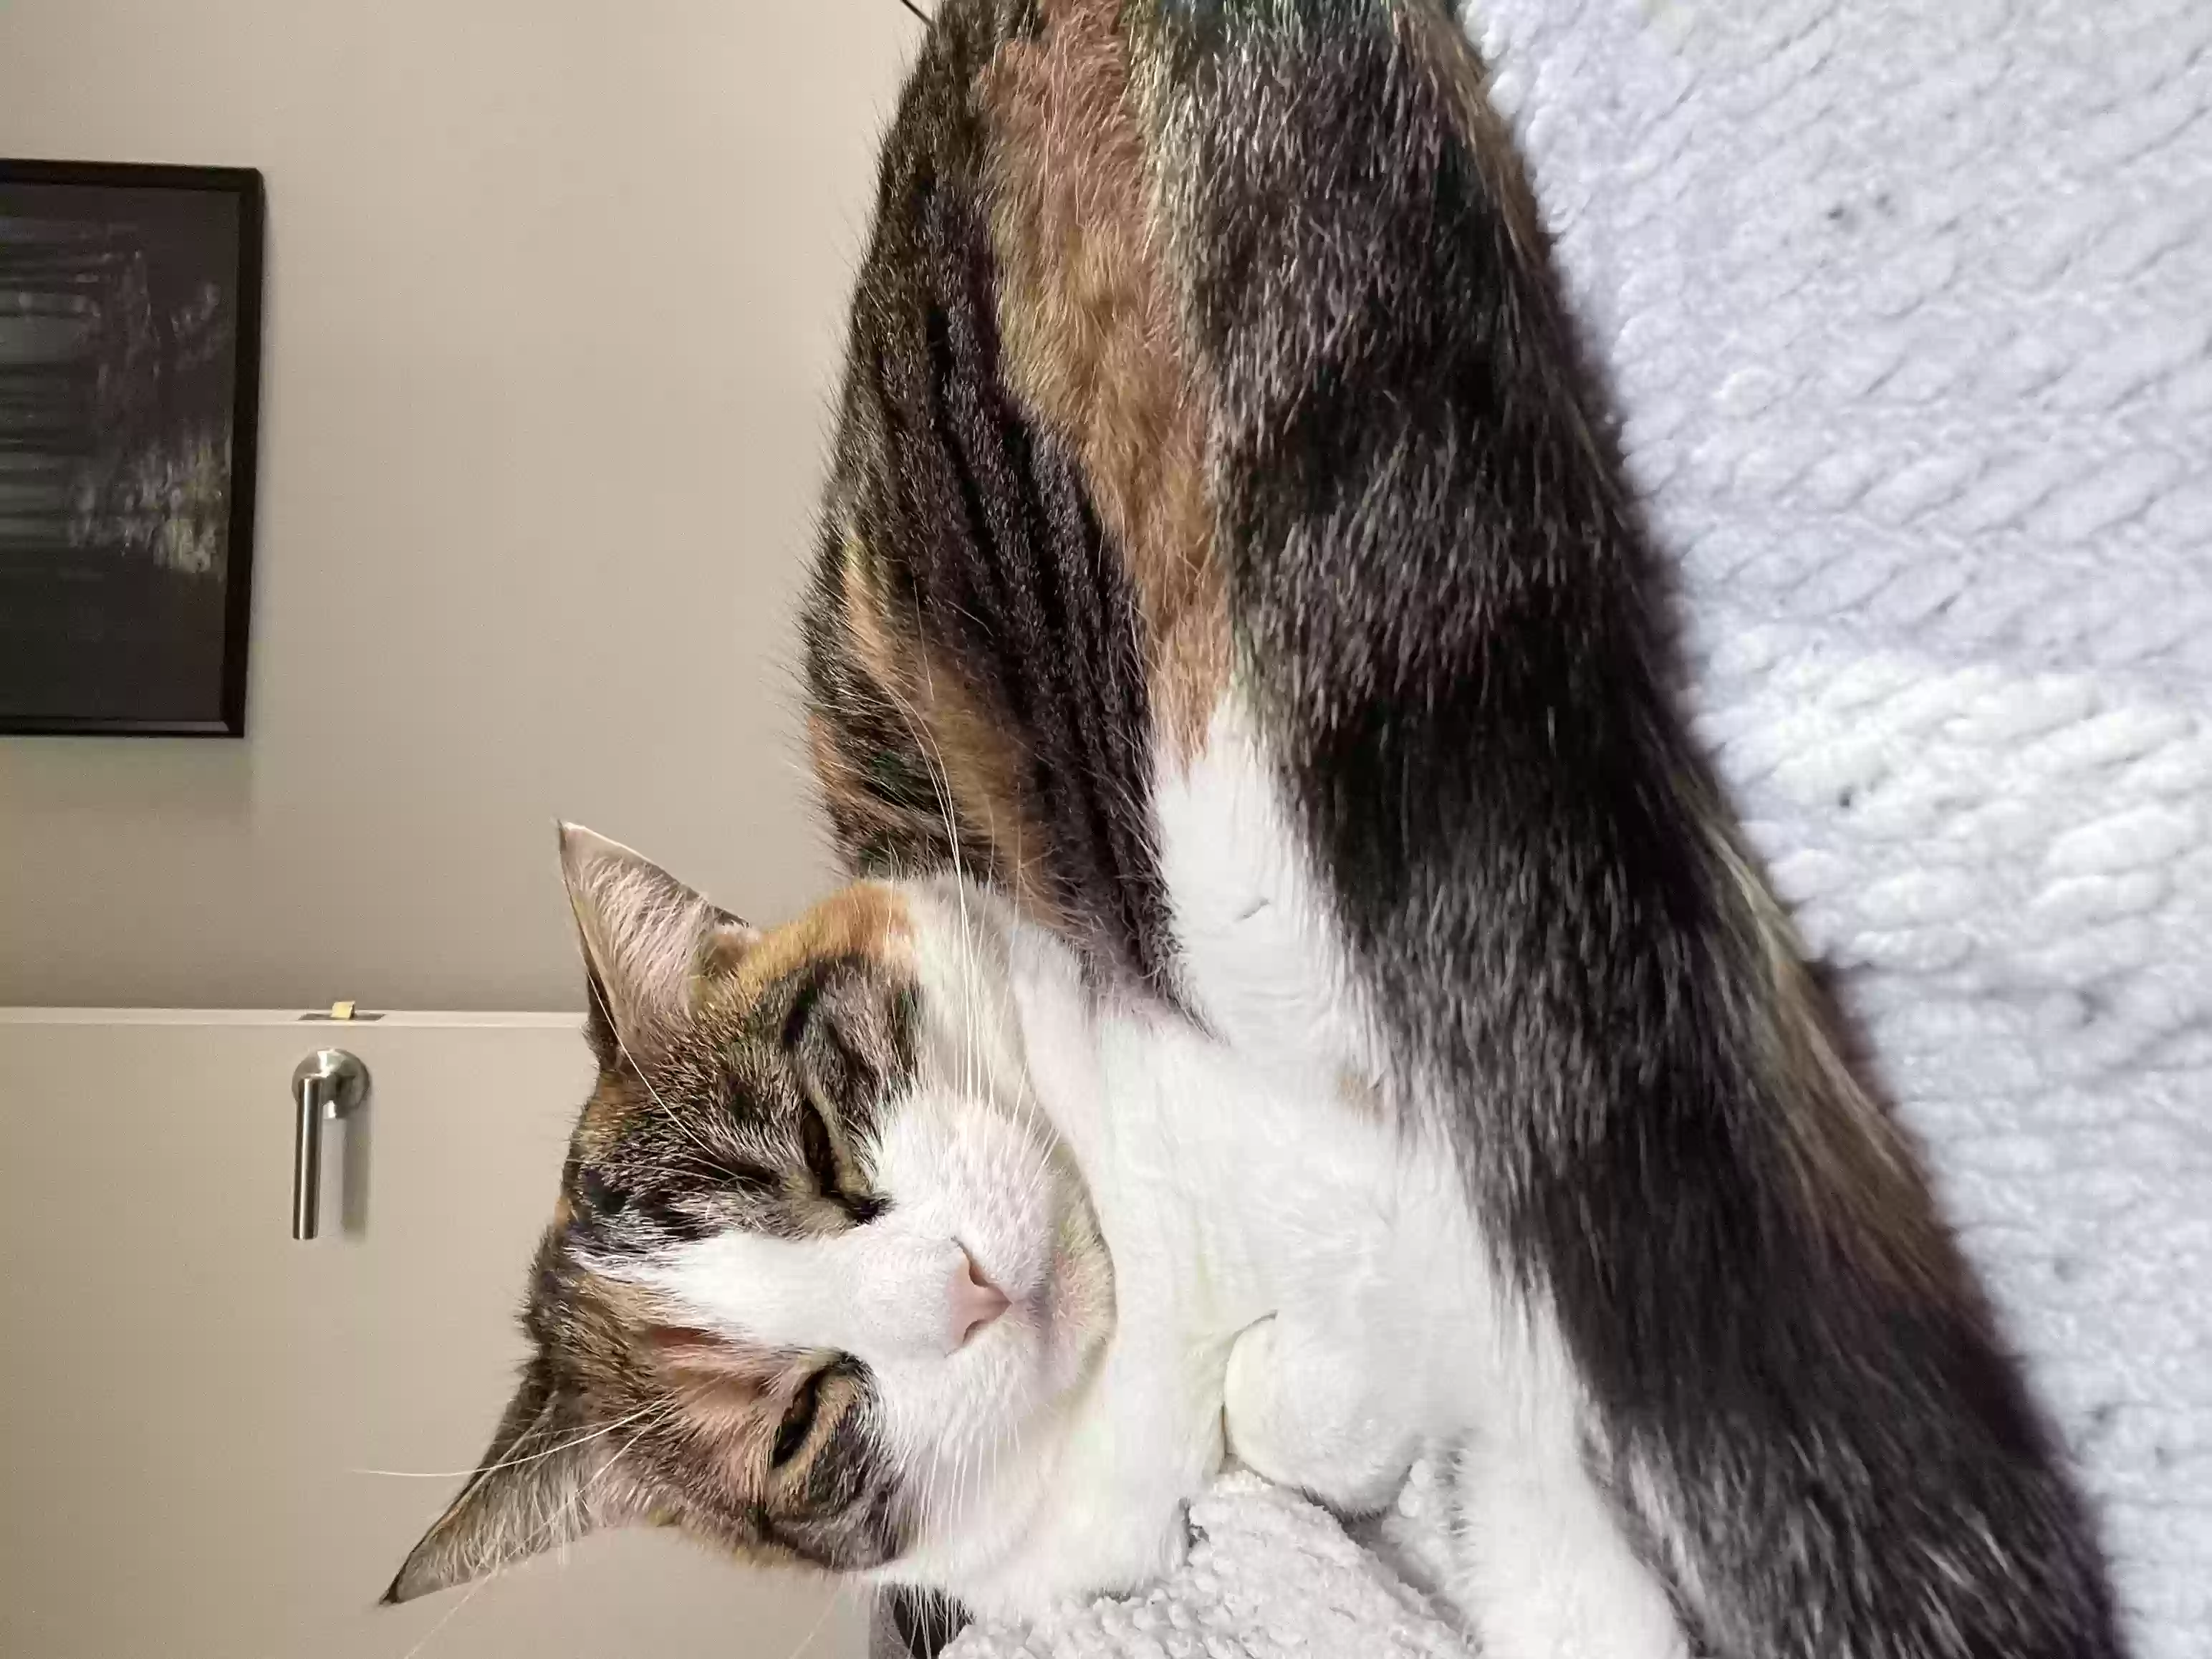 adoptable Cat in London,England named Athena